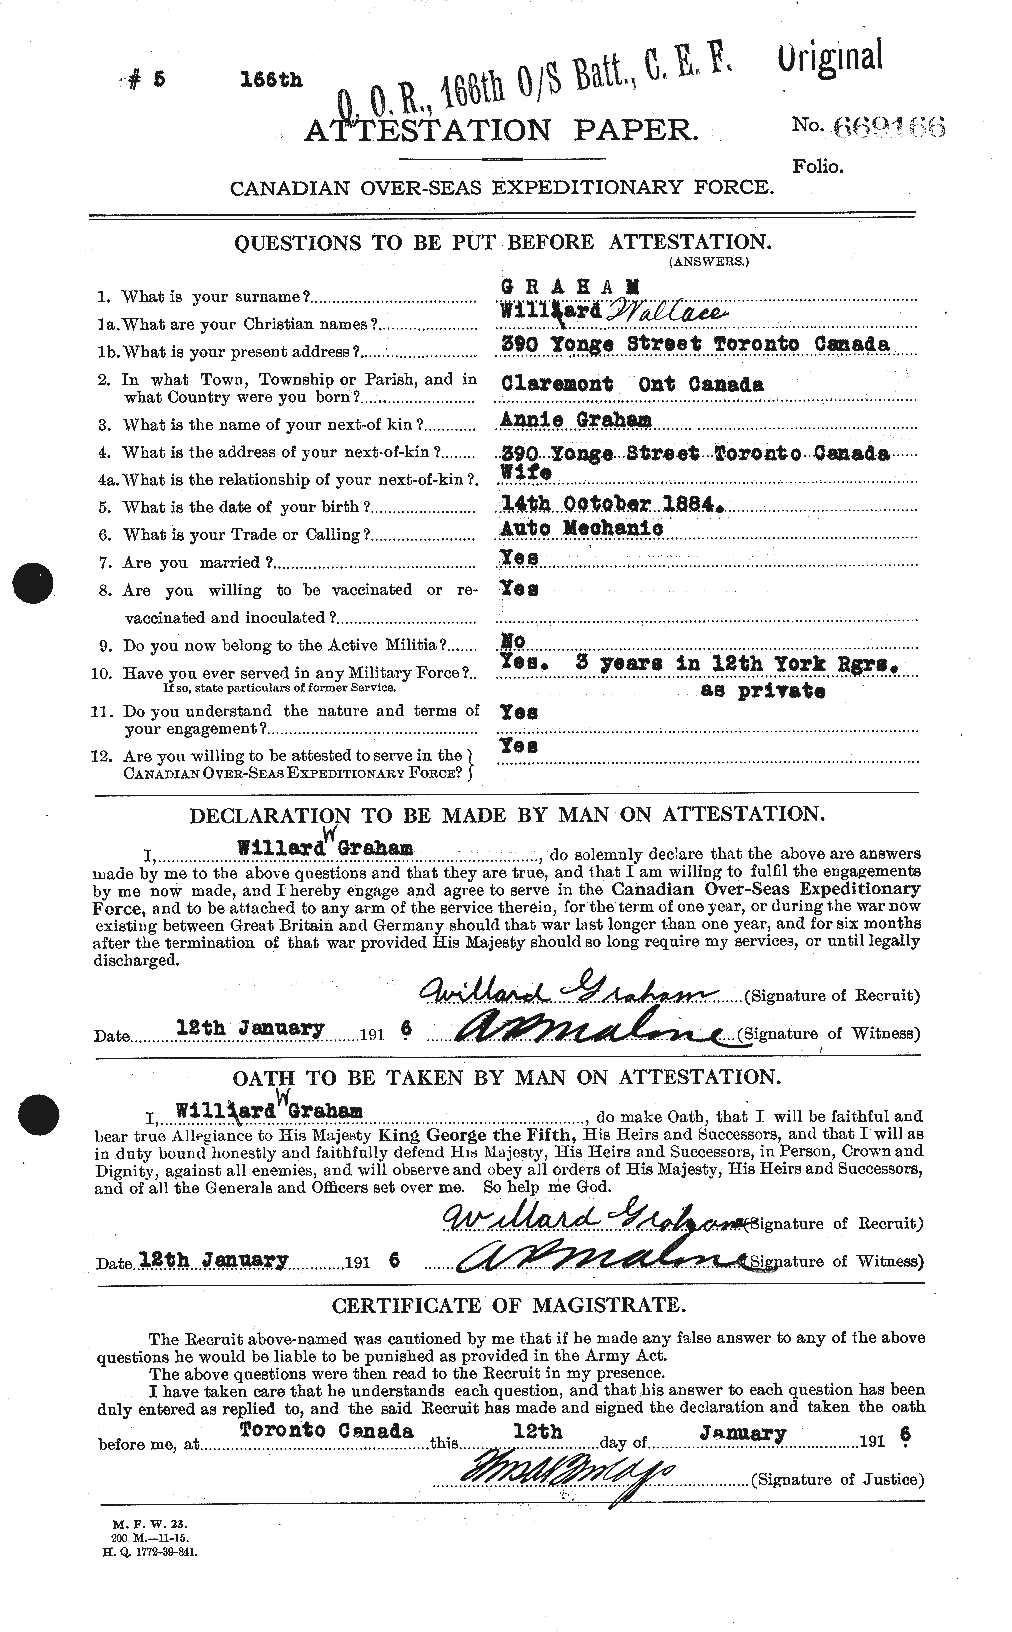 Personnel Records of the First World War - CEF 362678a